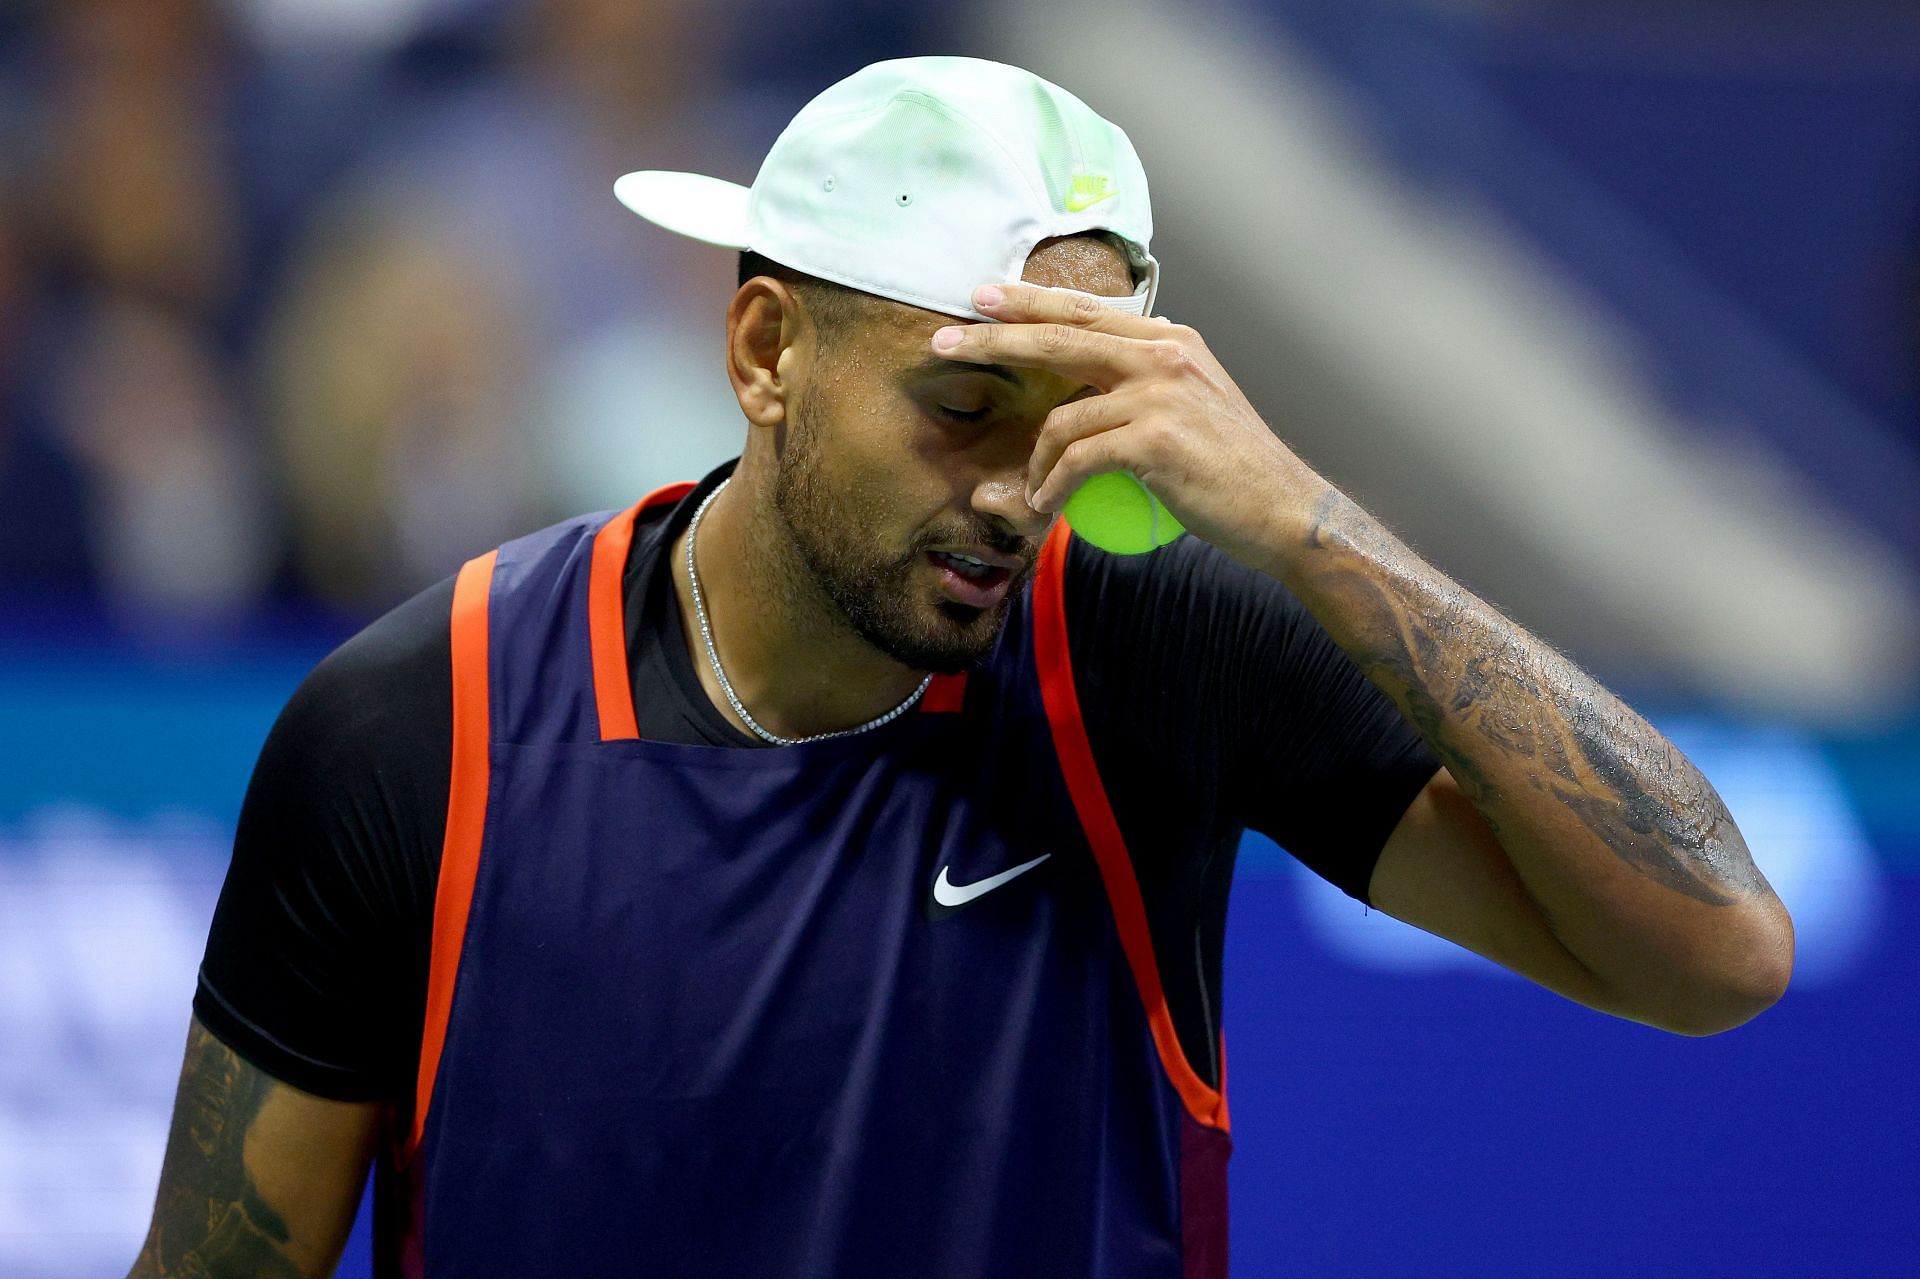 Nick Kyrgios at the 2022 US Open. (PC: Getty Images)